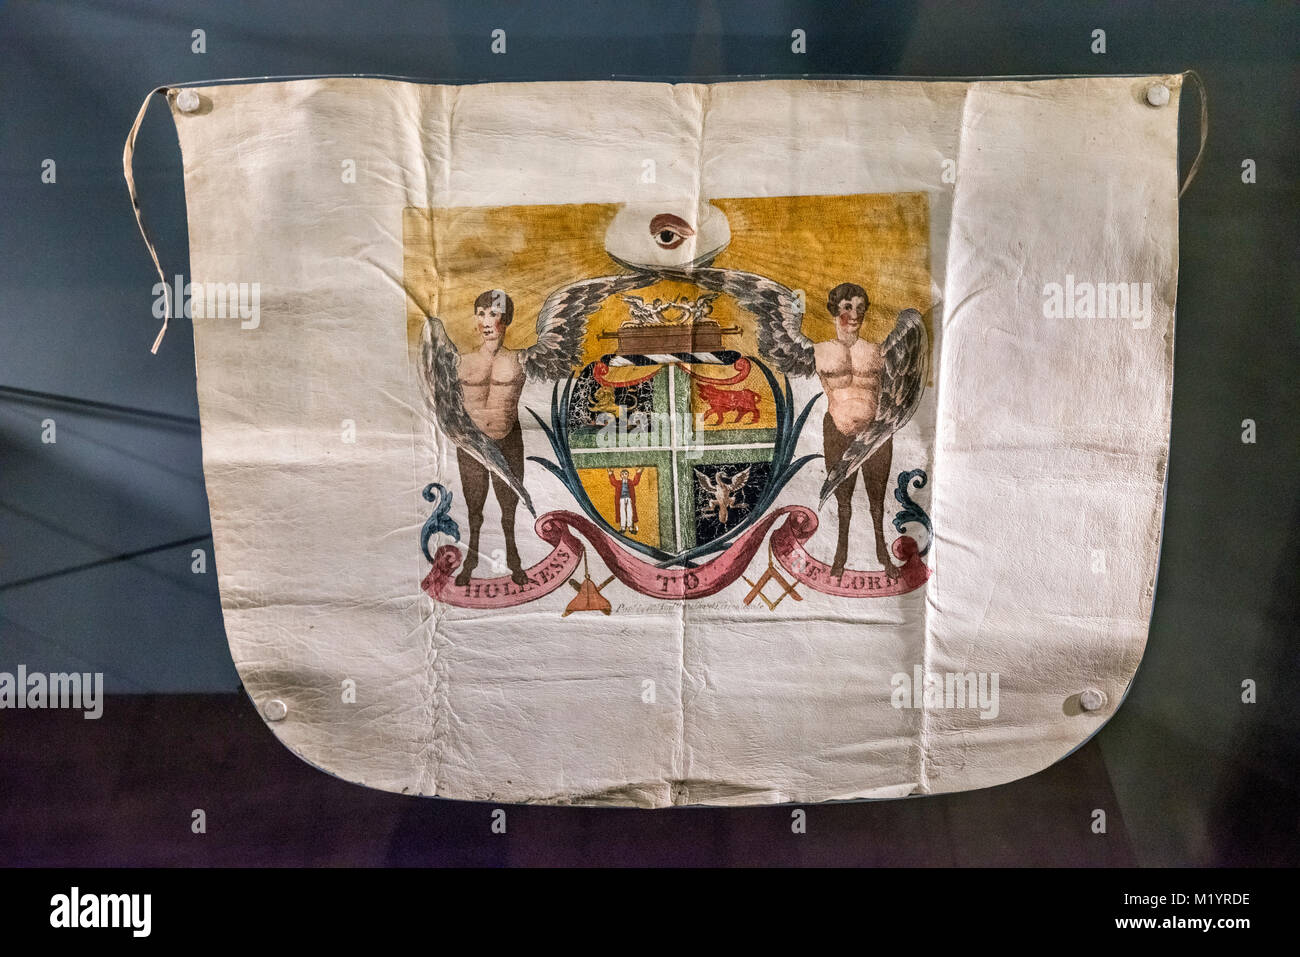 Freemason’s apron dating from around 1800, with the coat of arms of the Antients Grand Lodge. Stock Photo